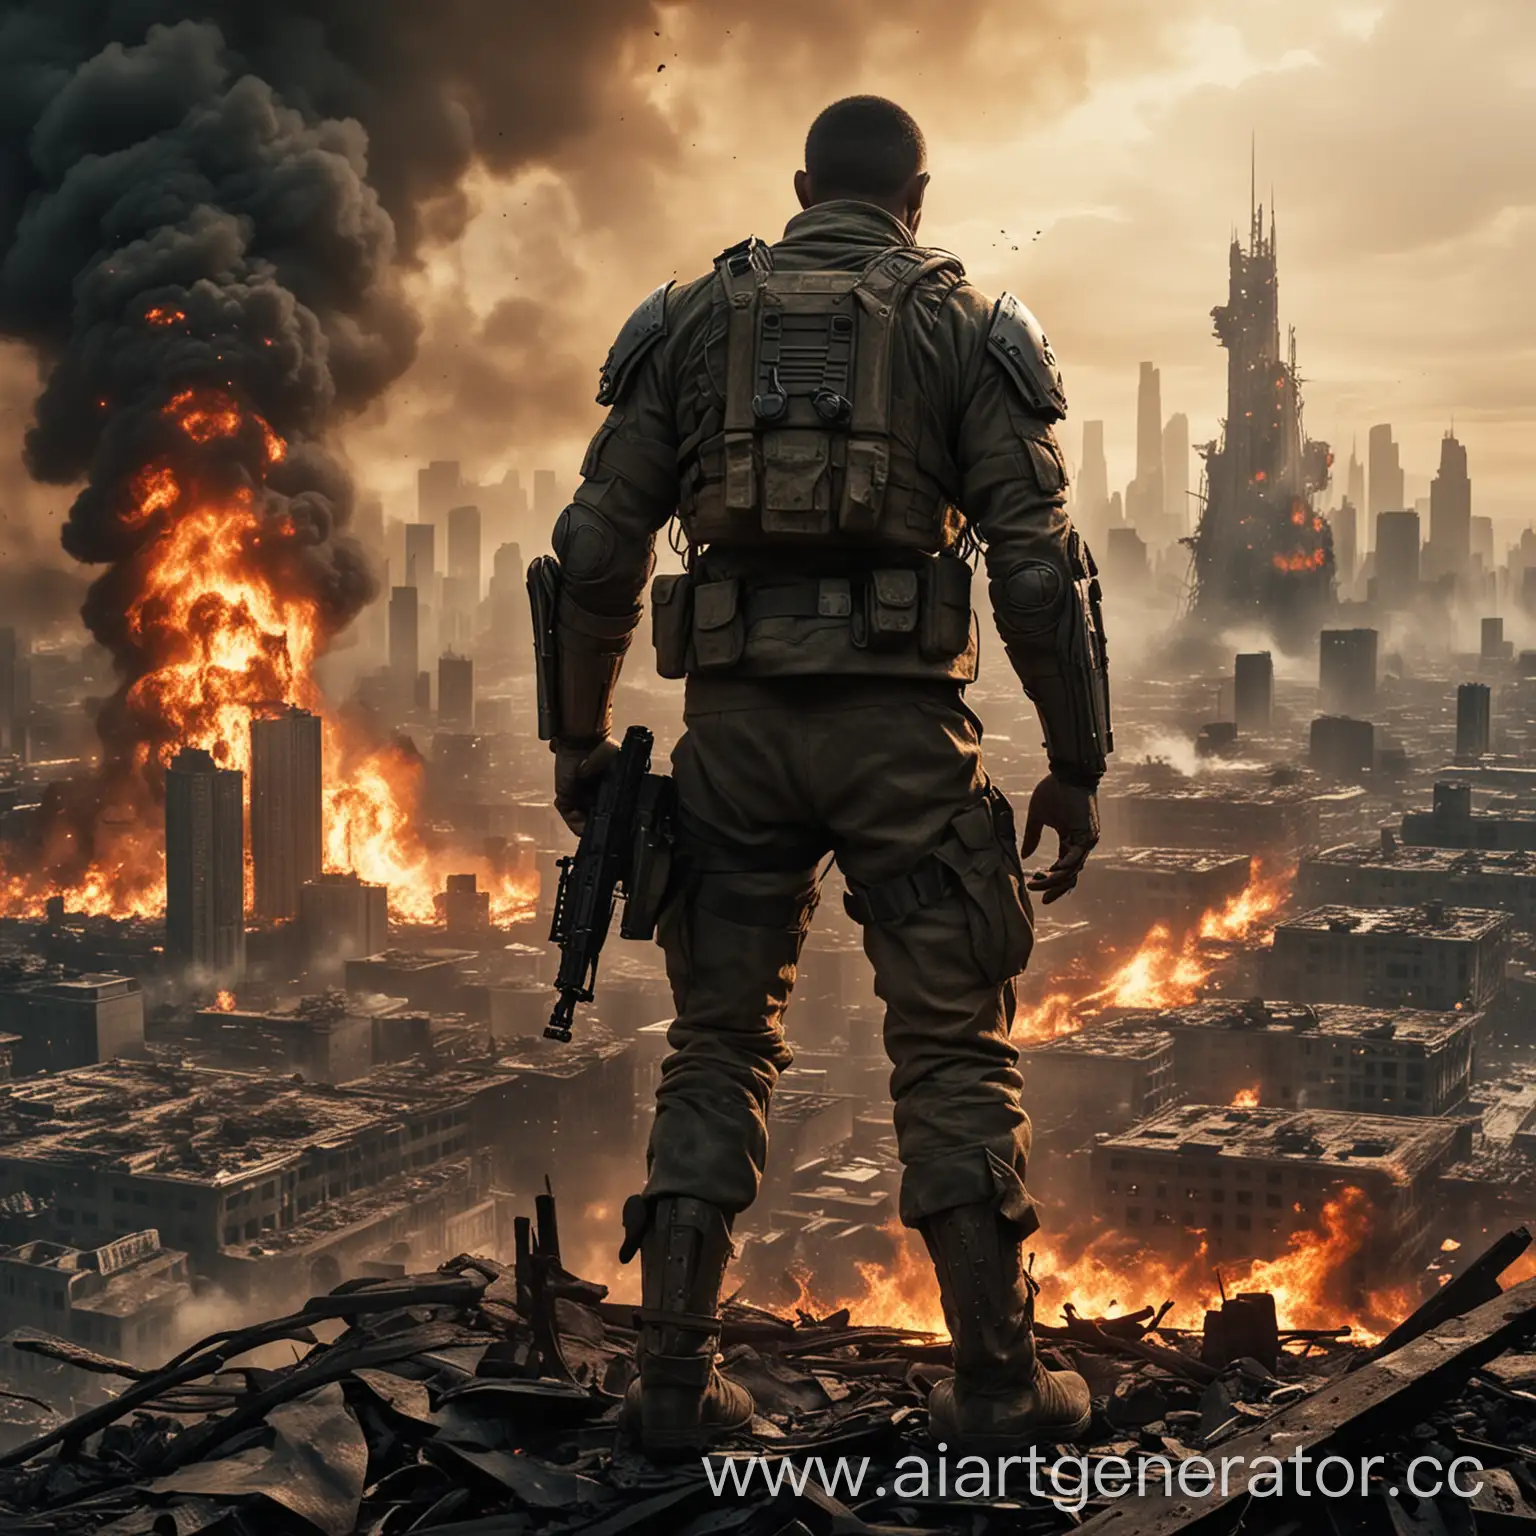 Courageous-Soldier-Man-Amidst-WarTorn-Future-City